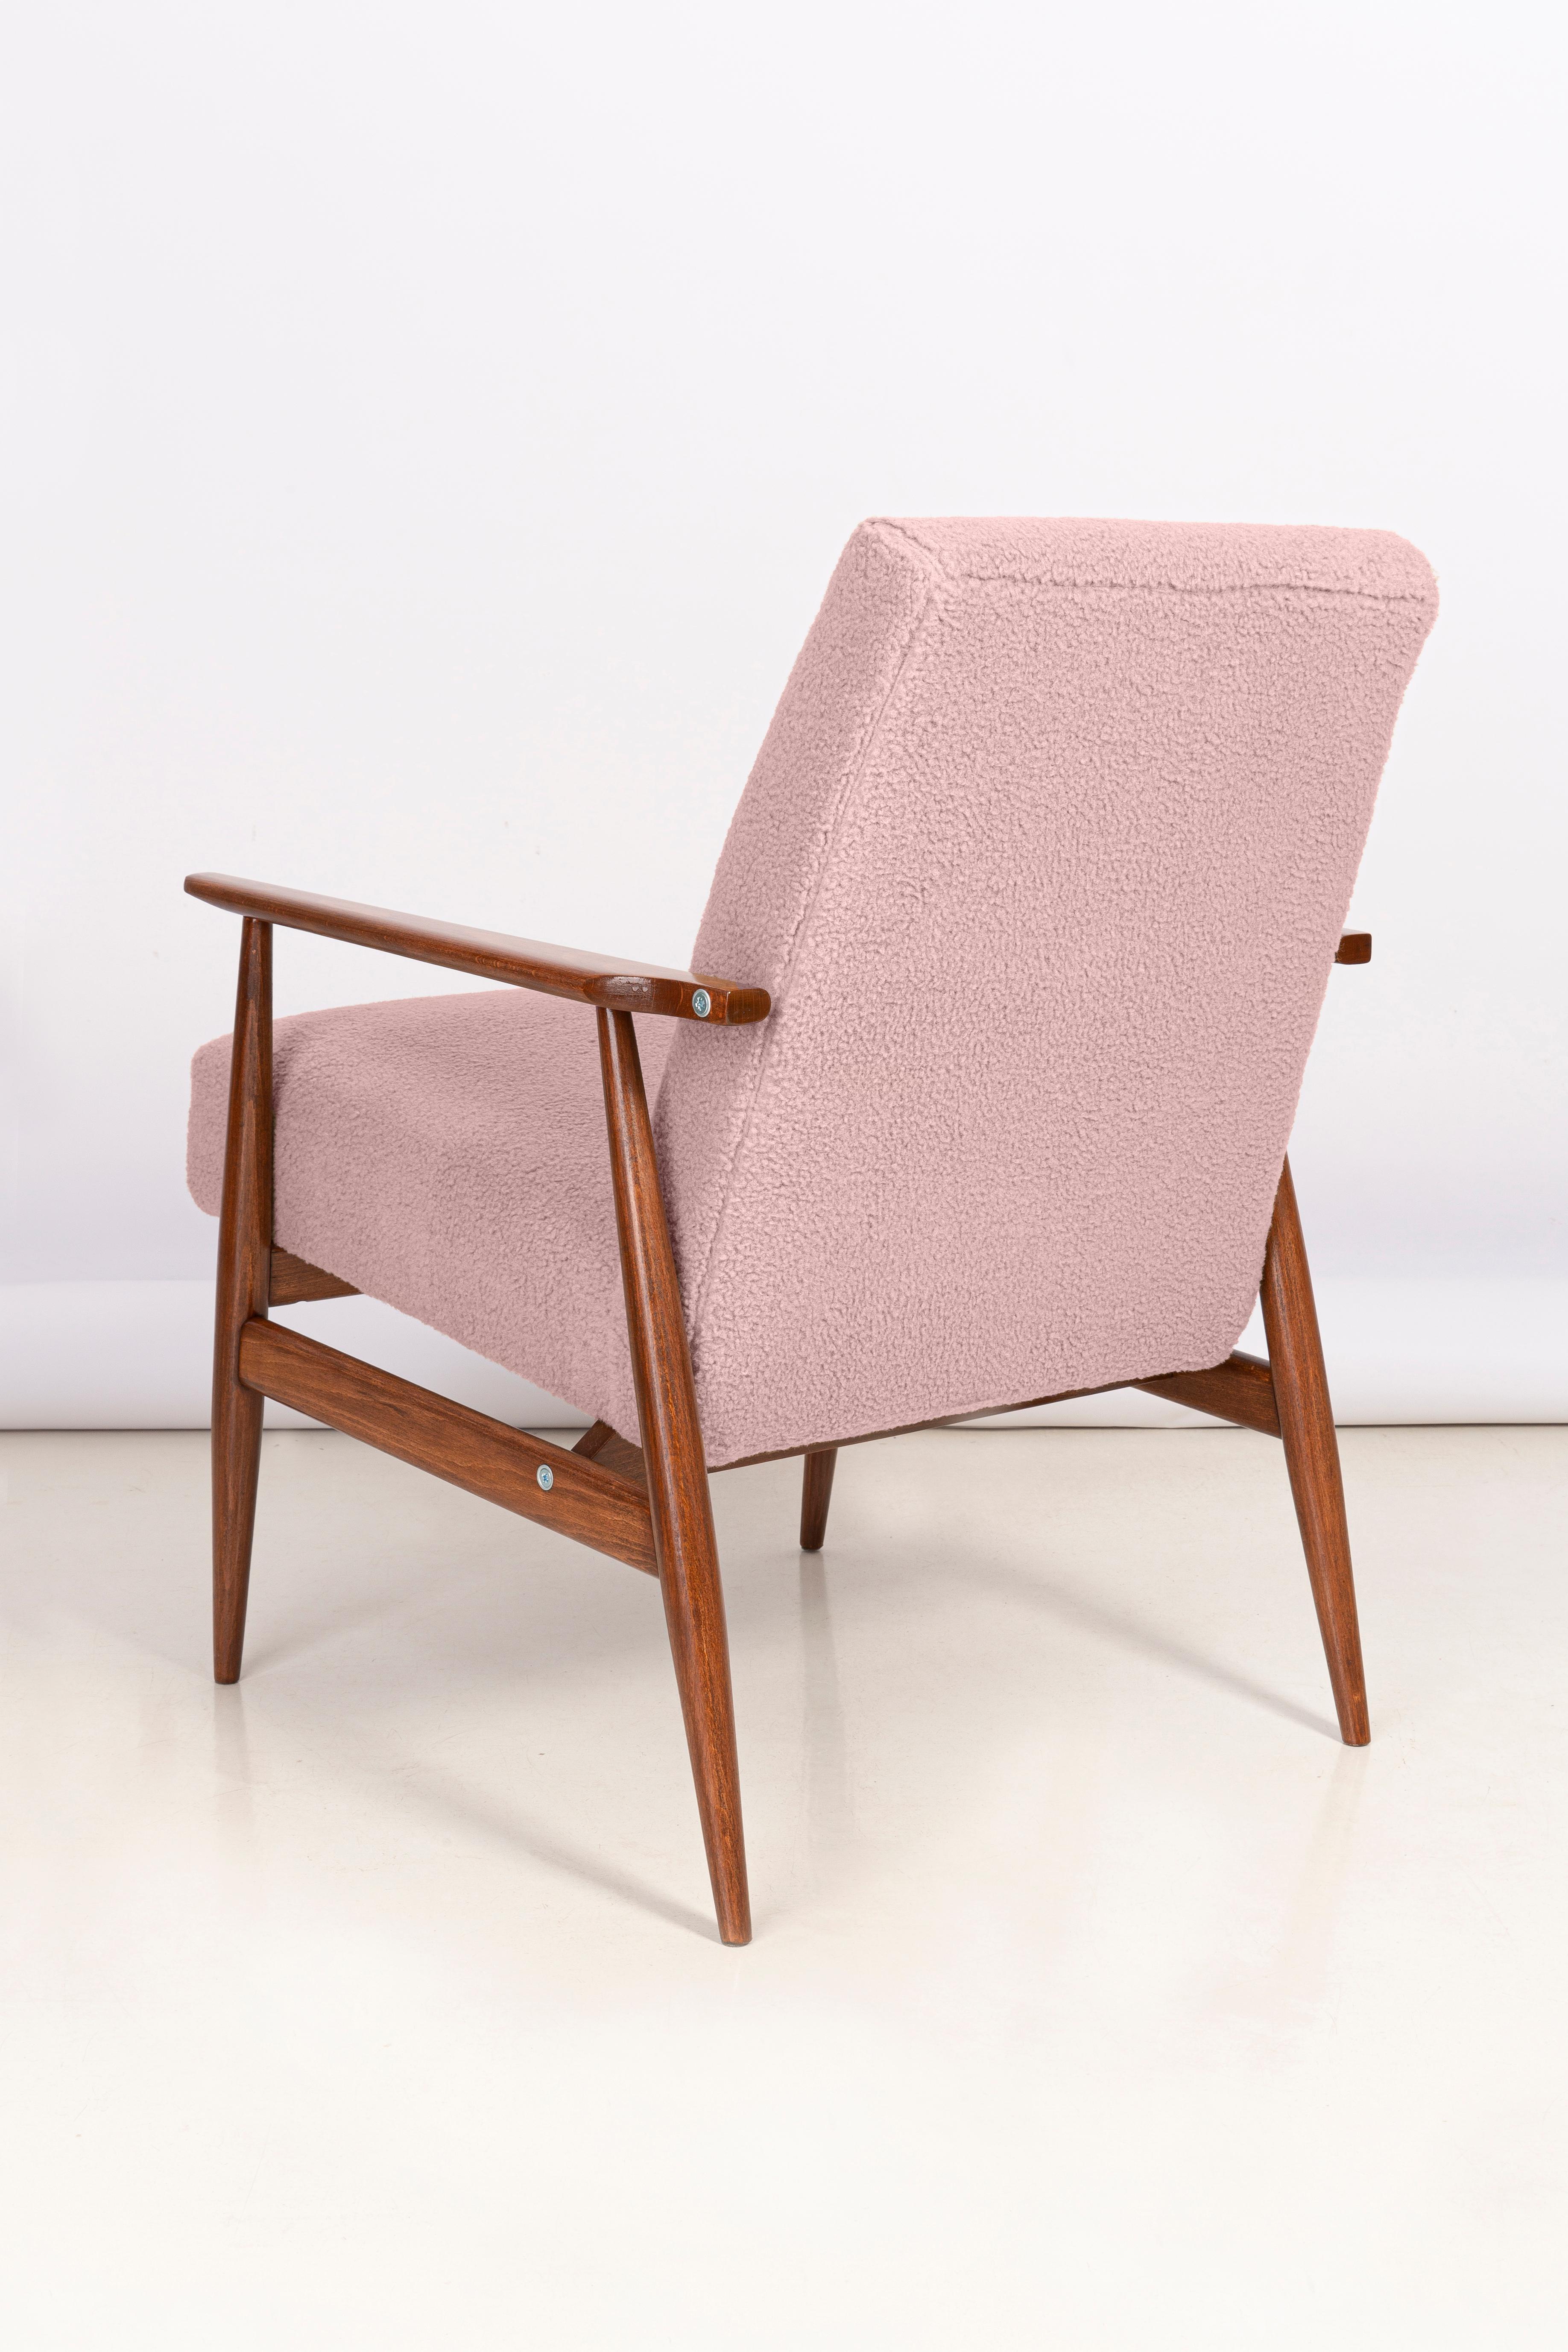 Pair of Dusty Pink Bouclé Dante Armchairs, H. Lis, Europe, 1960s For Sale 6